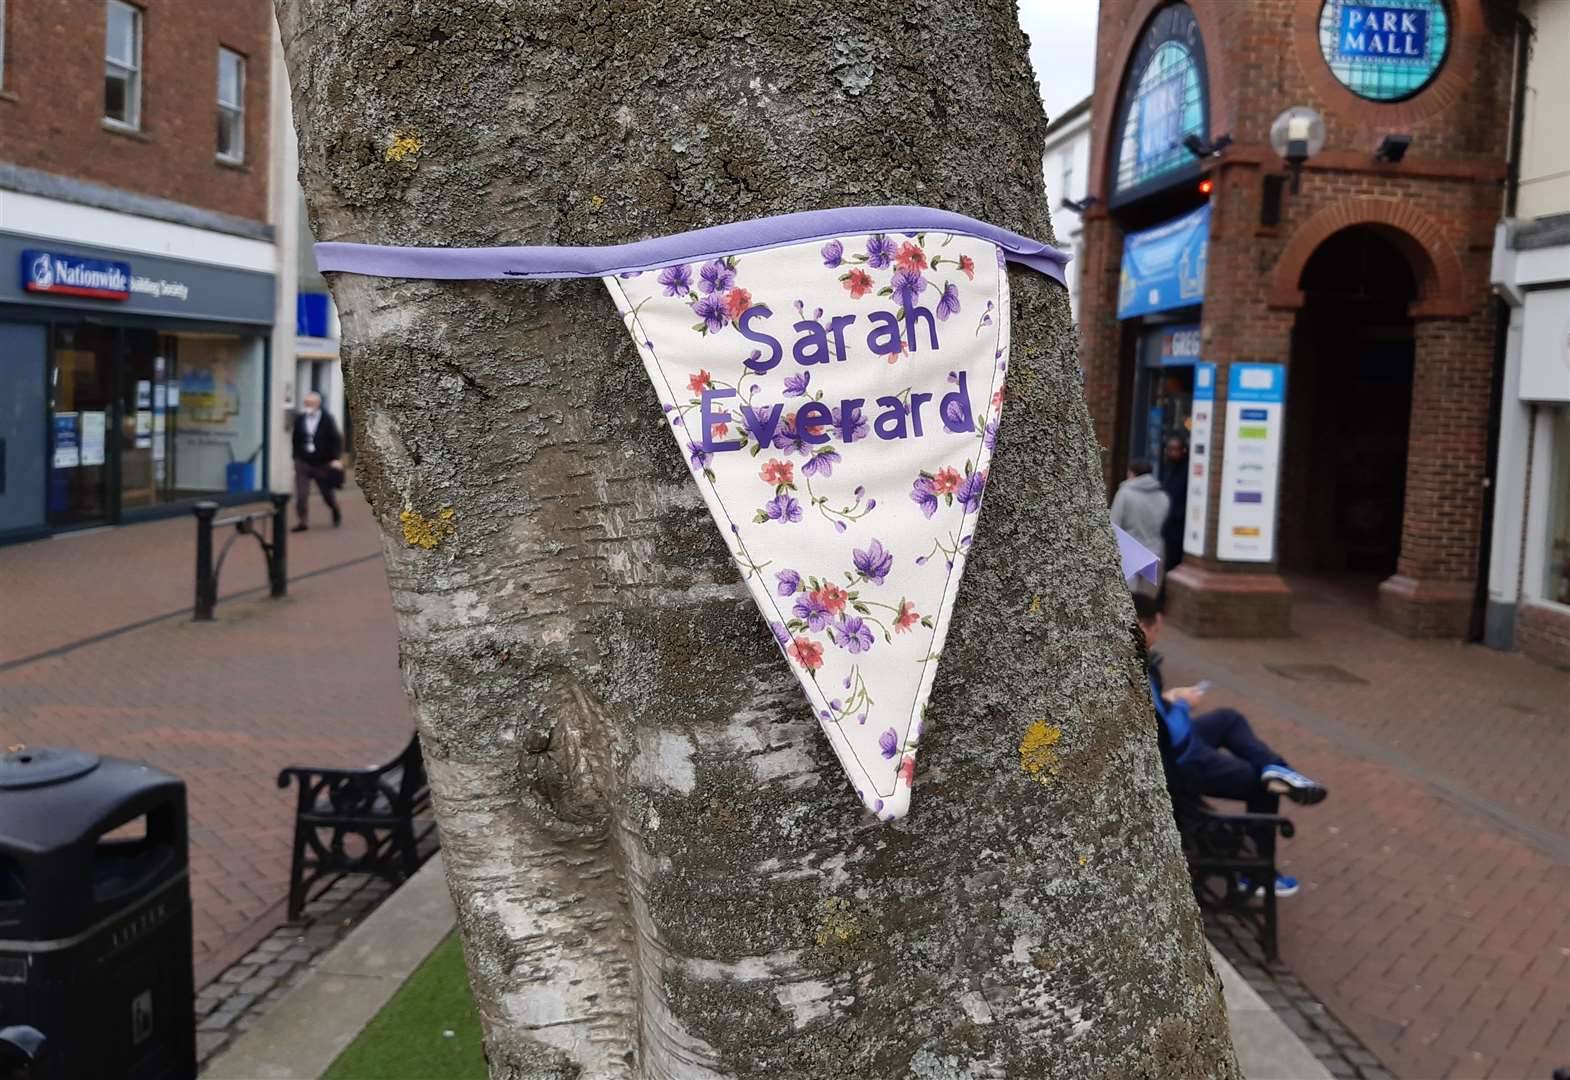 The tributes appeared in Ashford town centre earlier this week